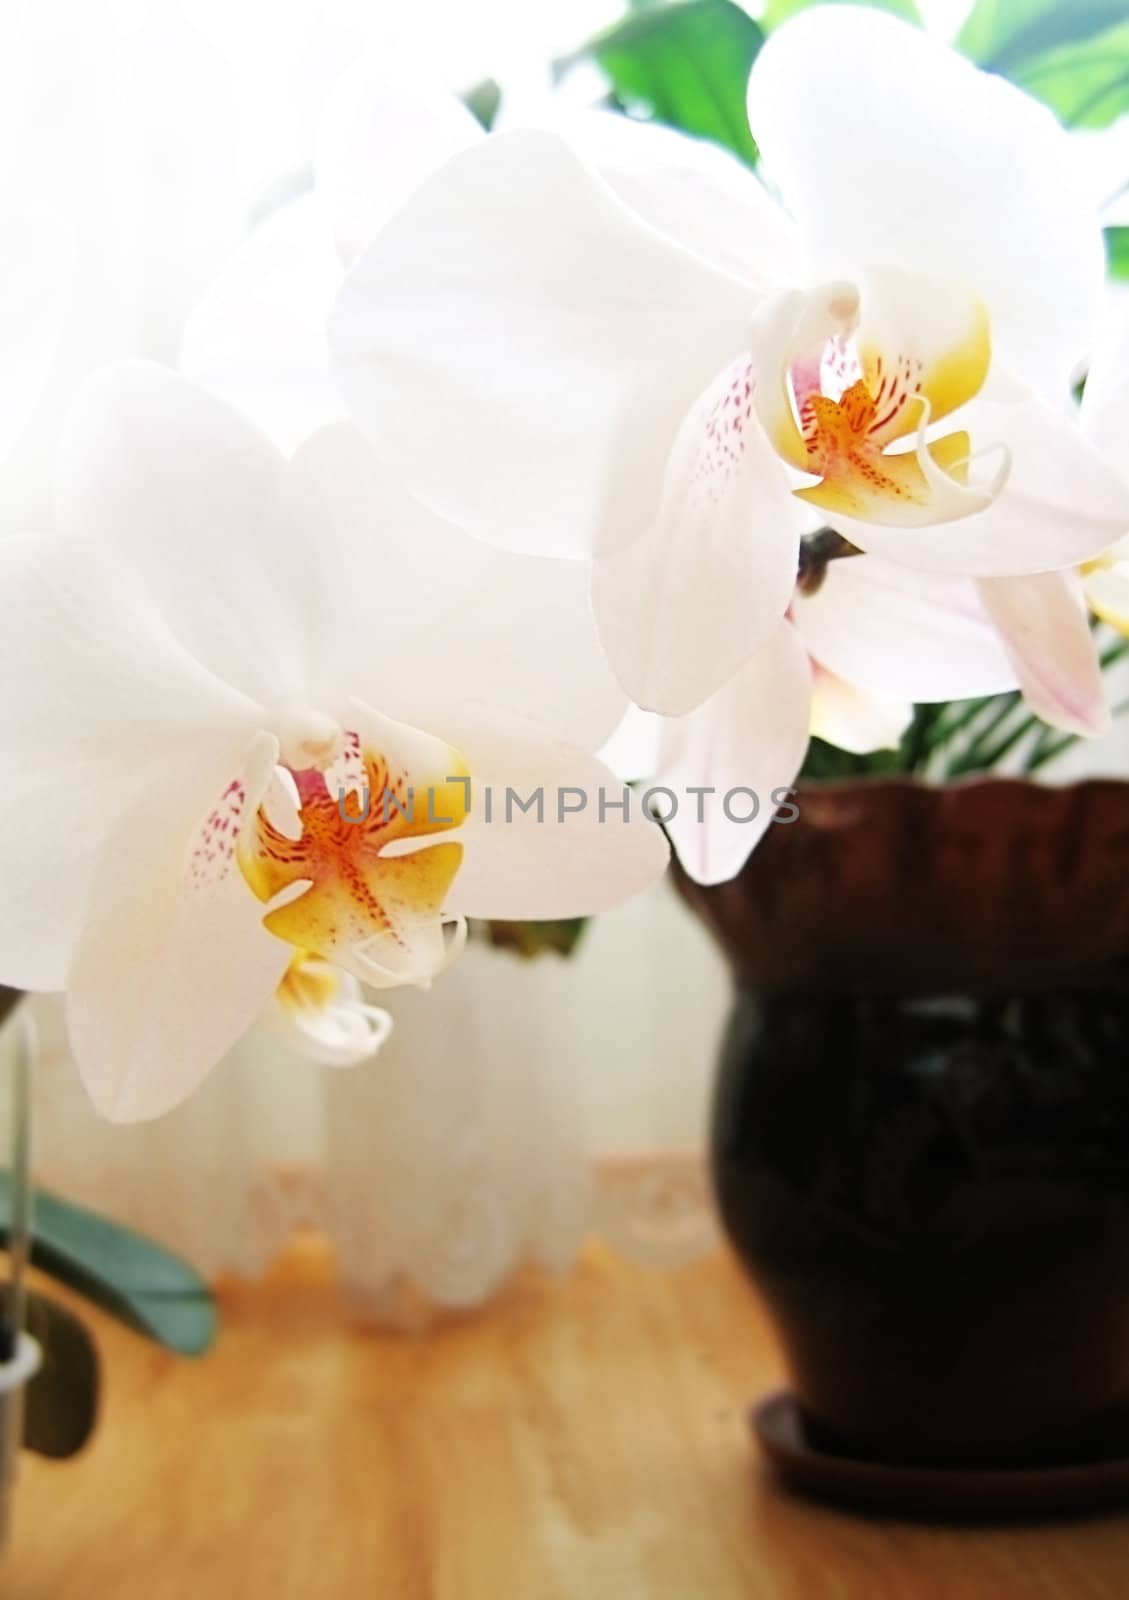 Orchid white blossom in flowerpot